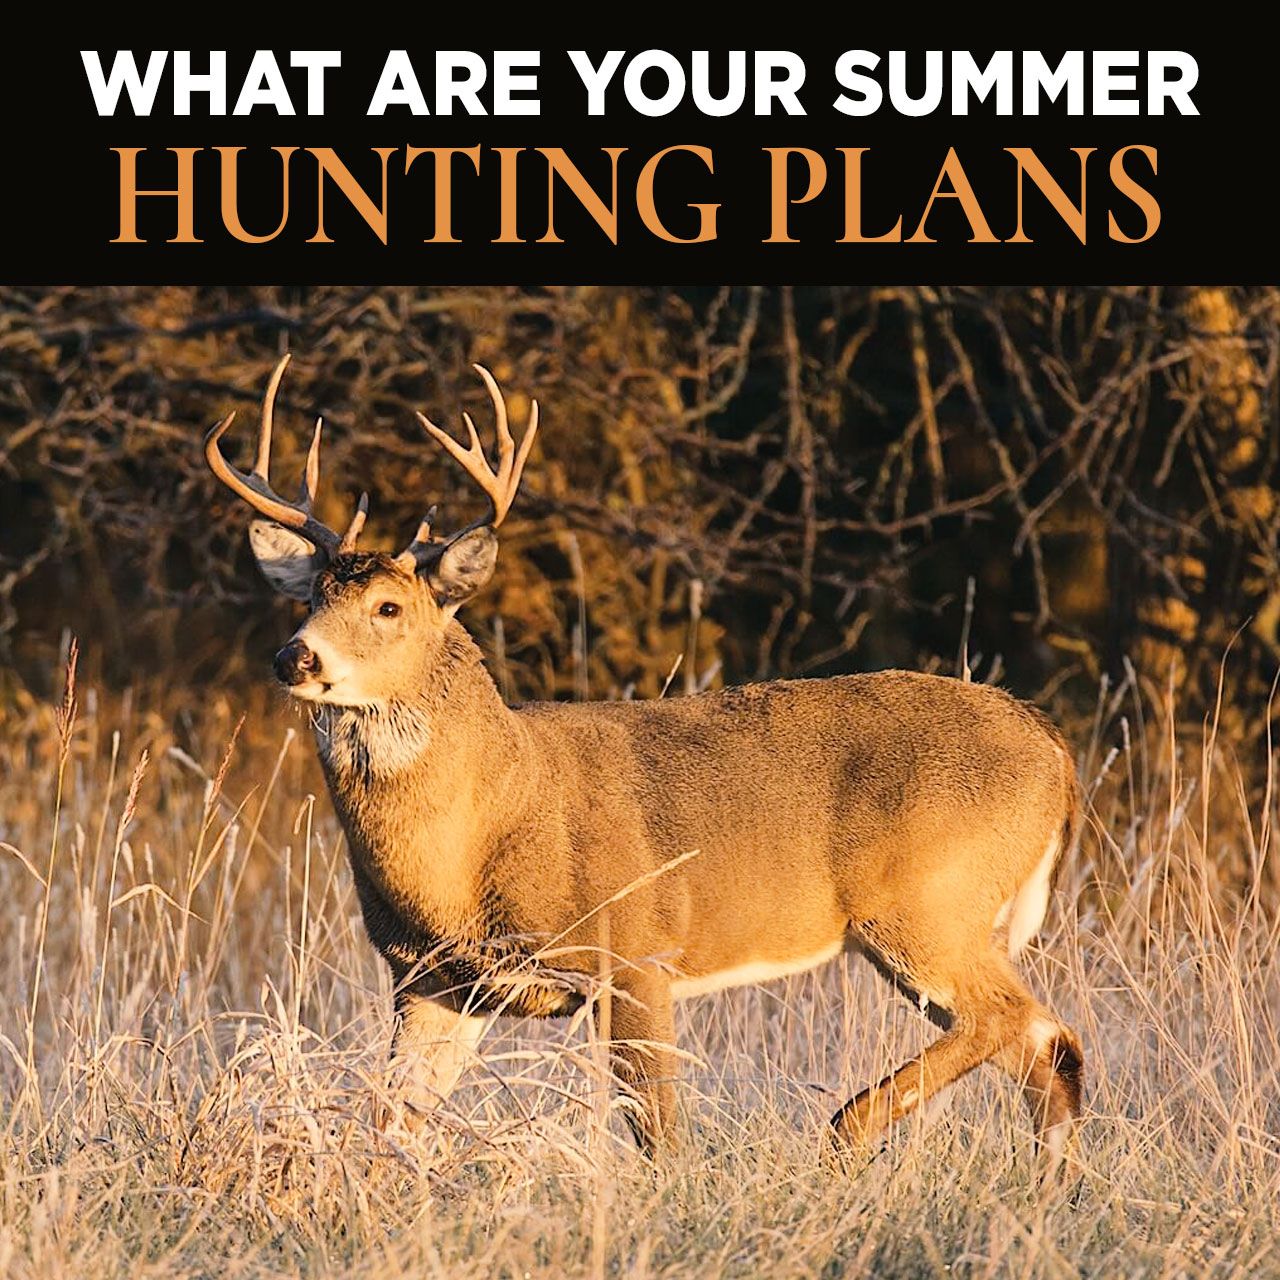 What Are Your Summer Hunting Plans?